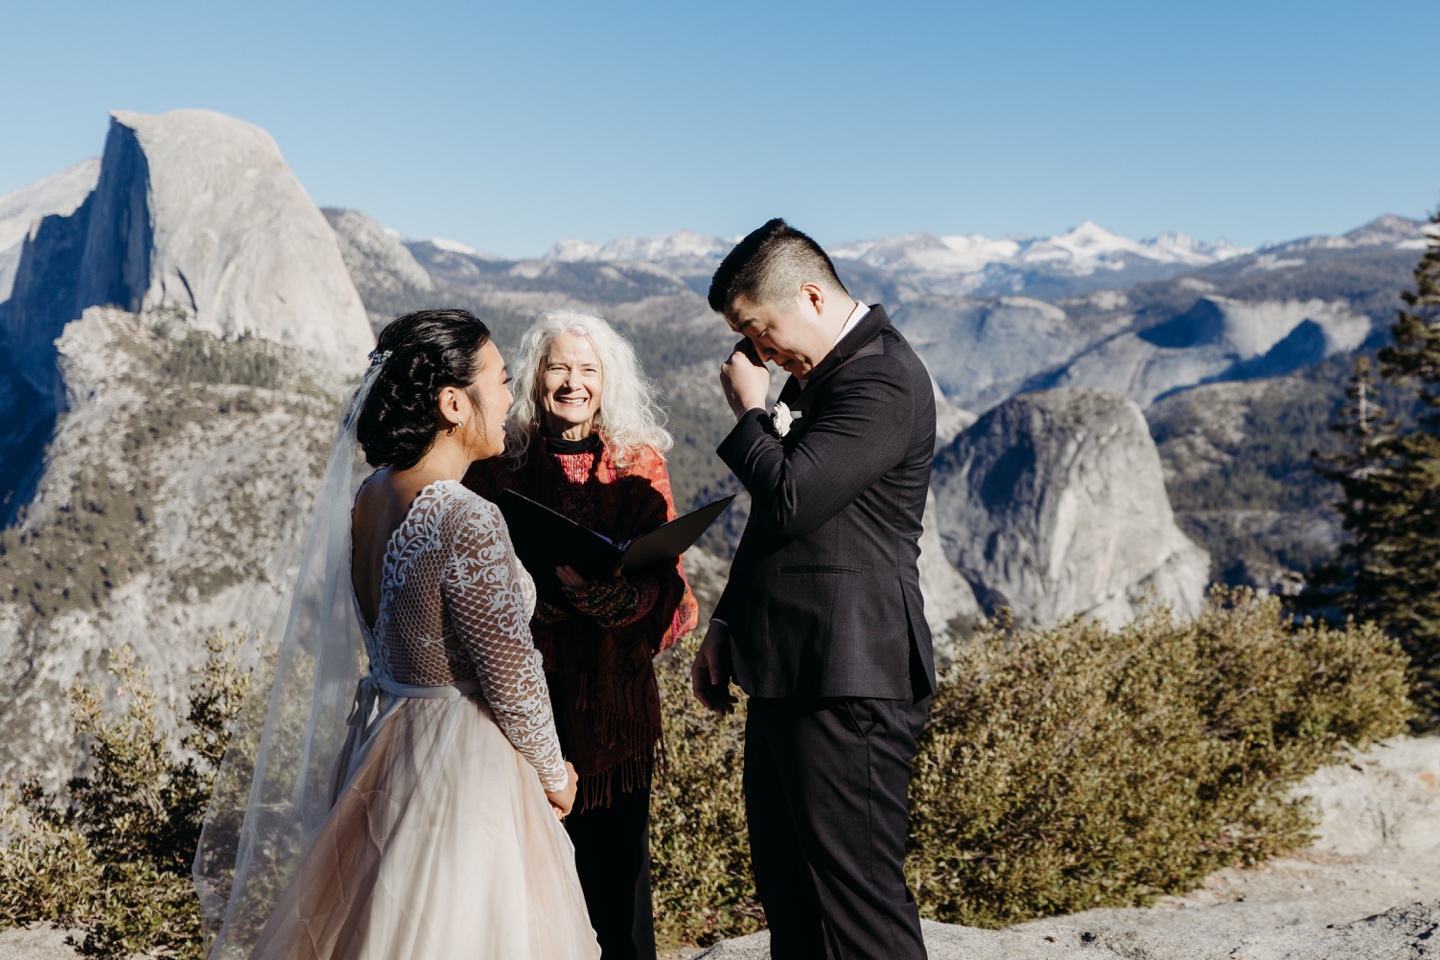 Groom dries his eyes as he says his vows and the bride and officiant smile at him. There are views of Yosemite in the distance. Photos taken by Yosemite elopement photographer, Liz Koston.